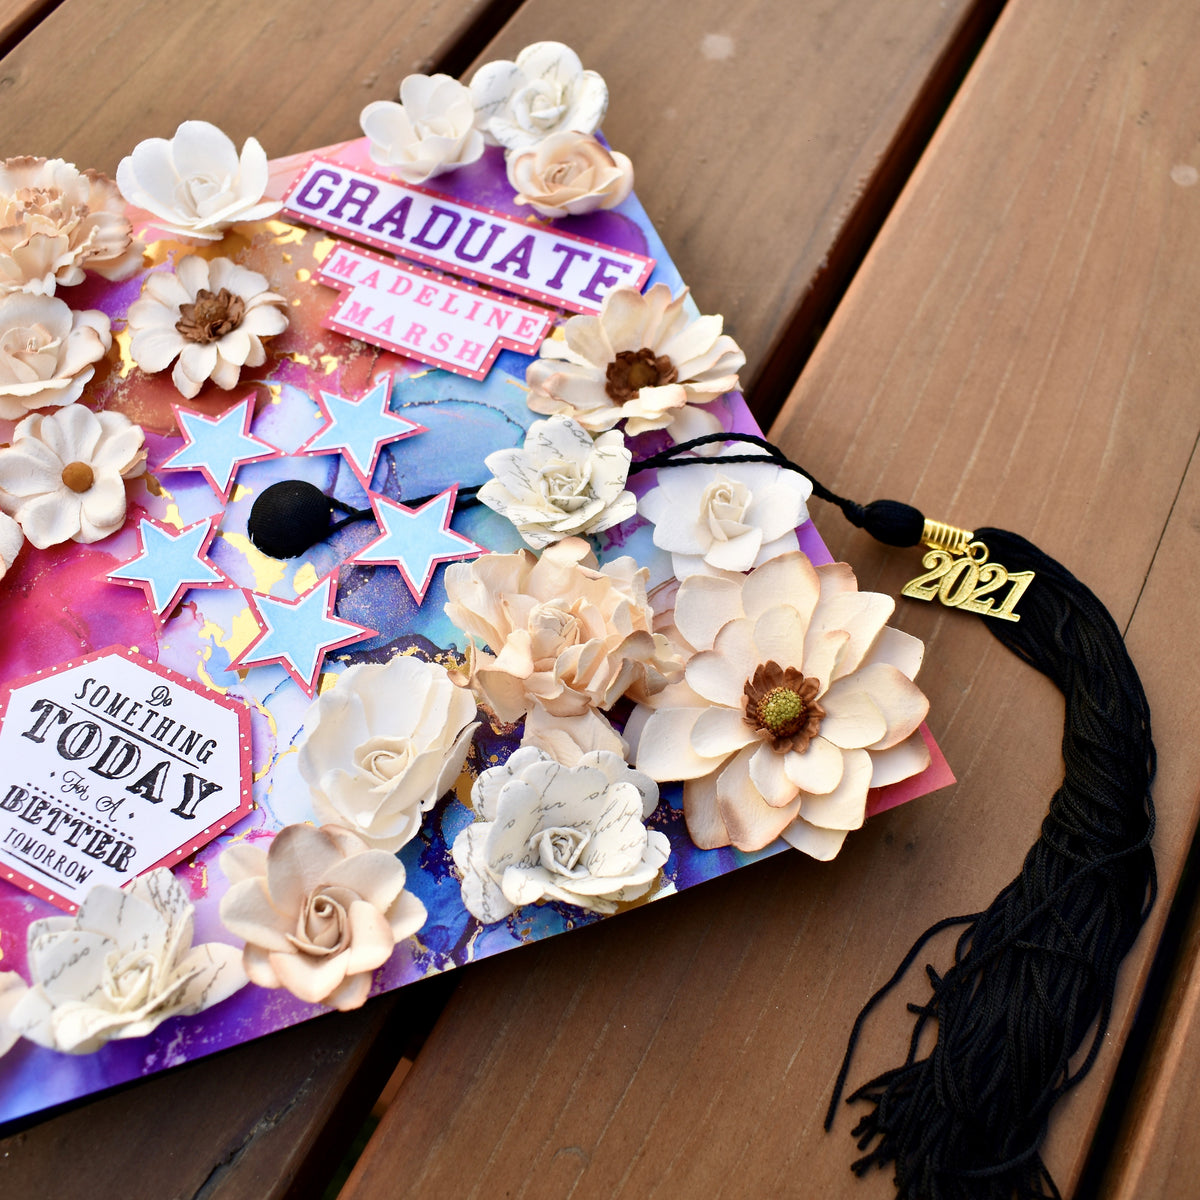 How to Decorate a Graduation Cap with Flowers